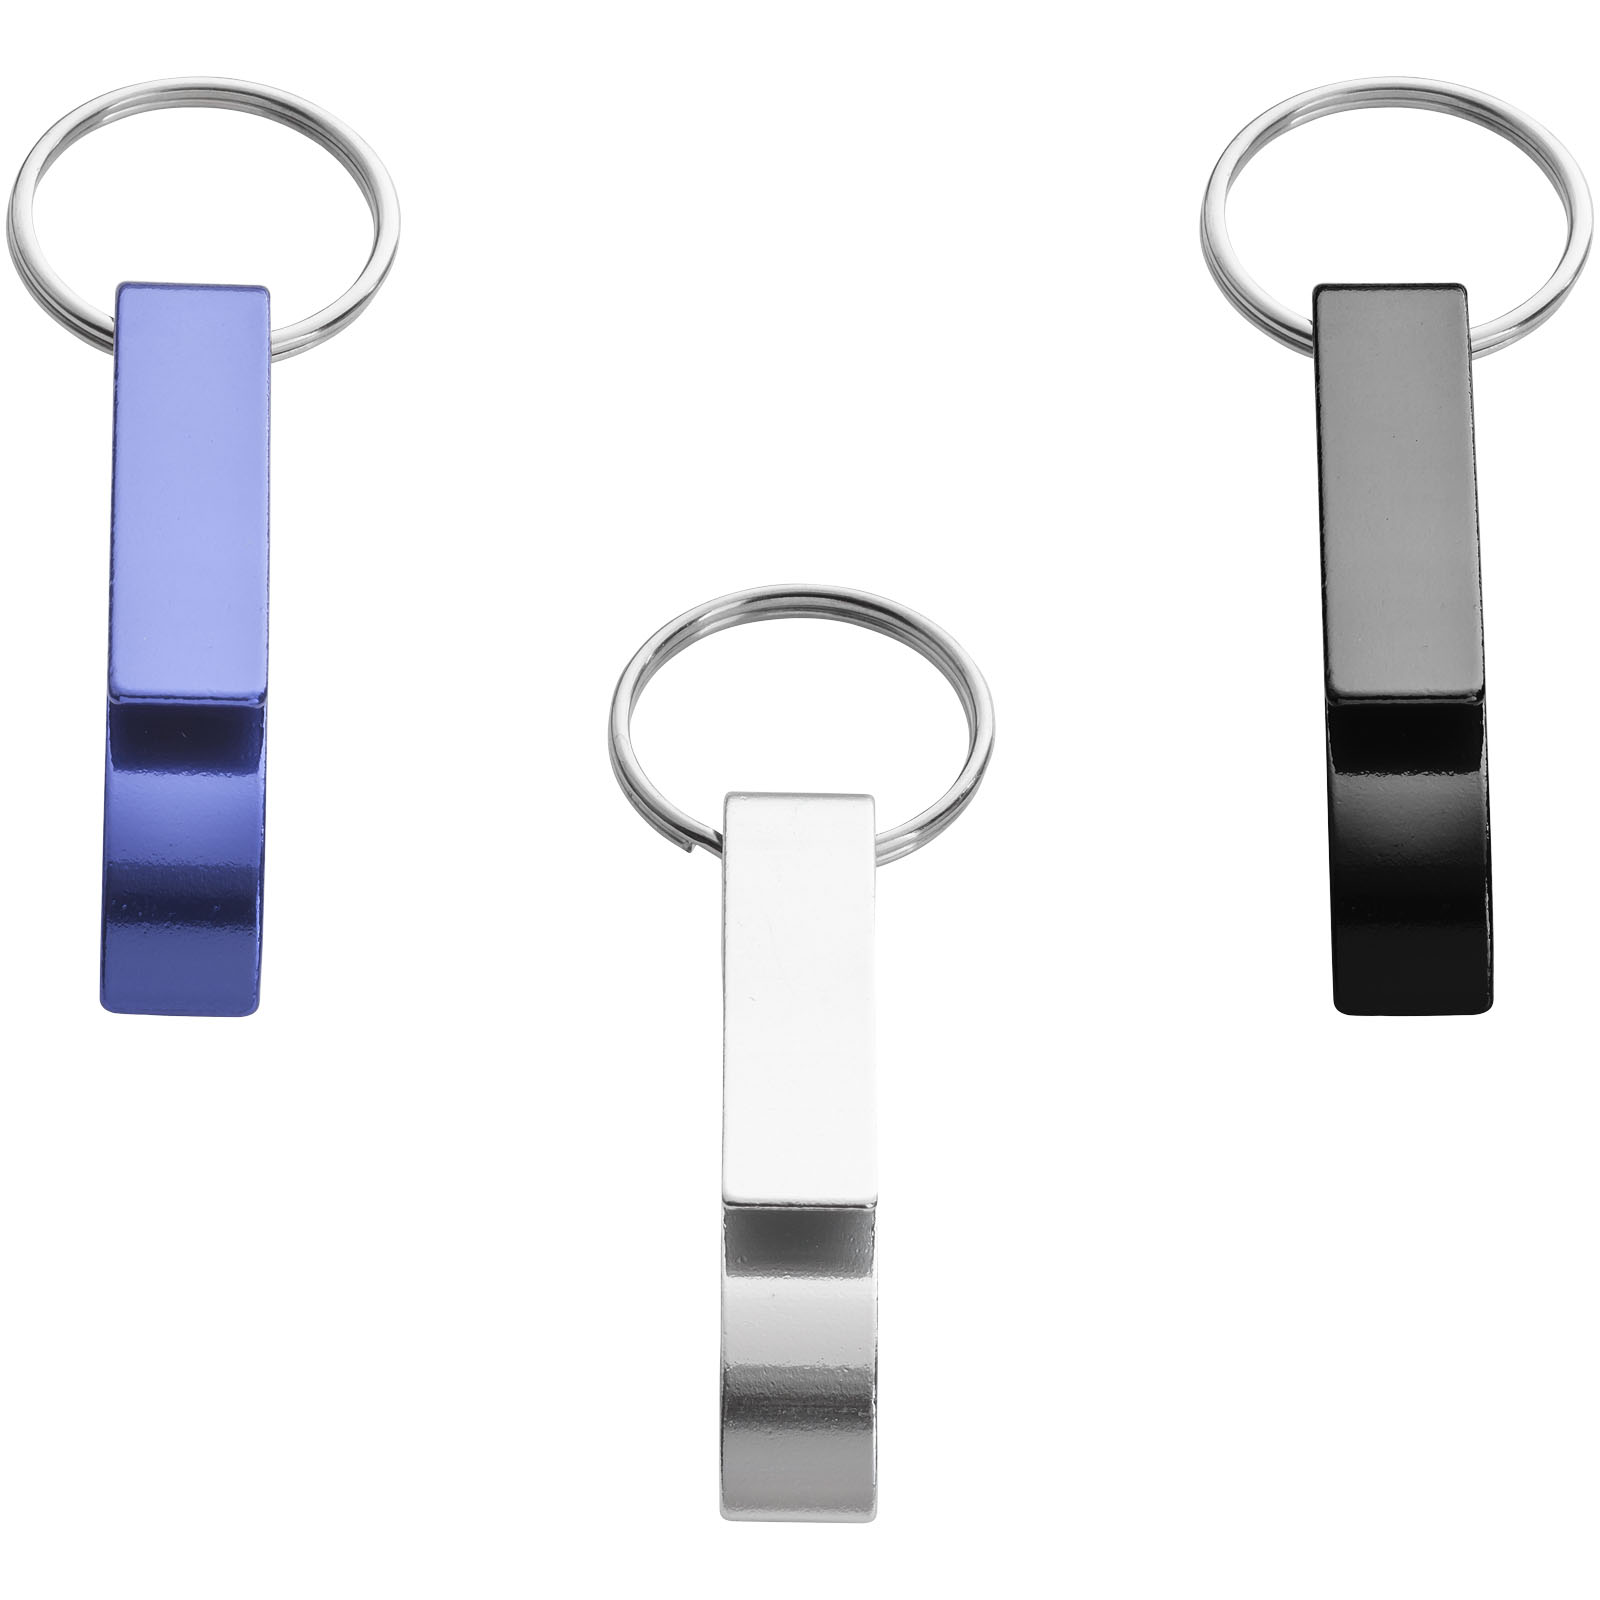 Advertising Bottle Openers & Accessories - Tao bottle and can opener keychain - 3